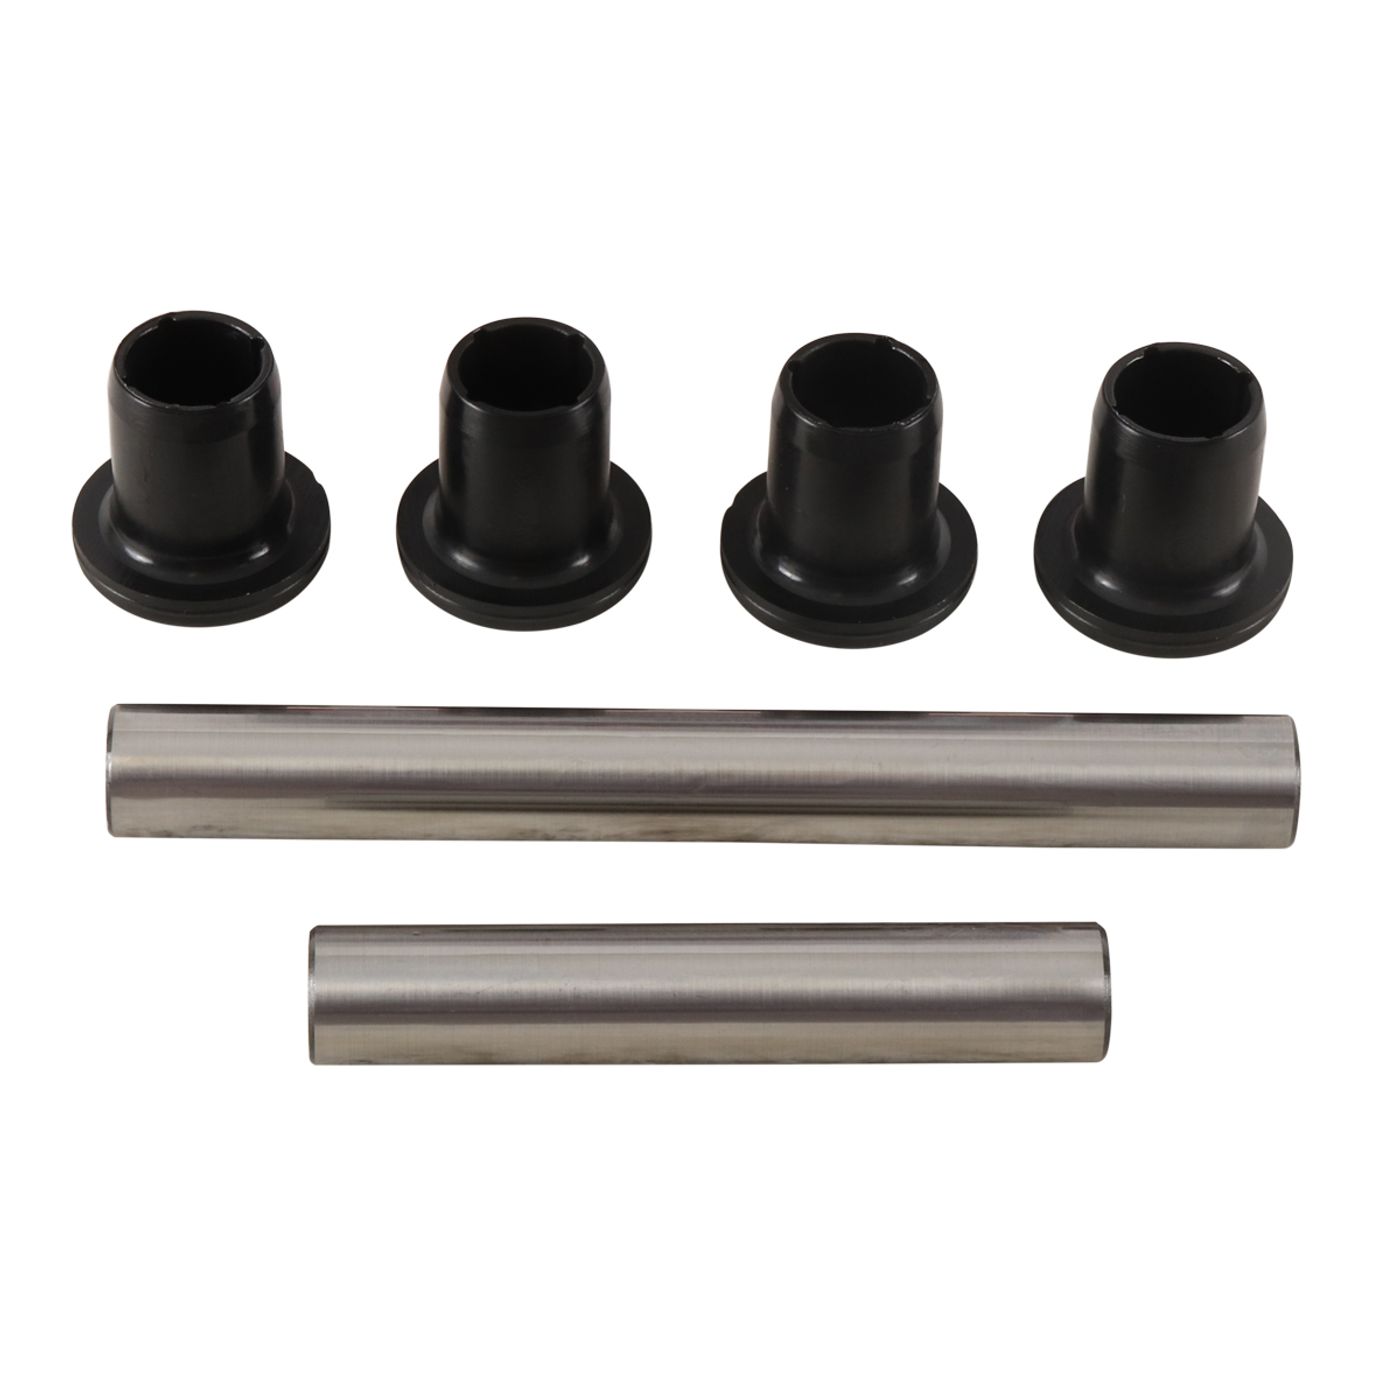 Wrp Rear Ind. Suspension Kits - WRP501217 image